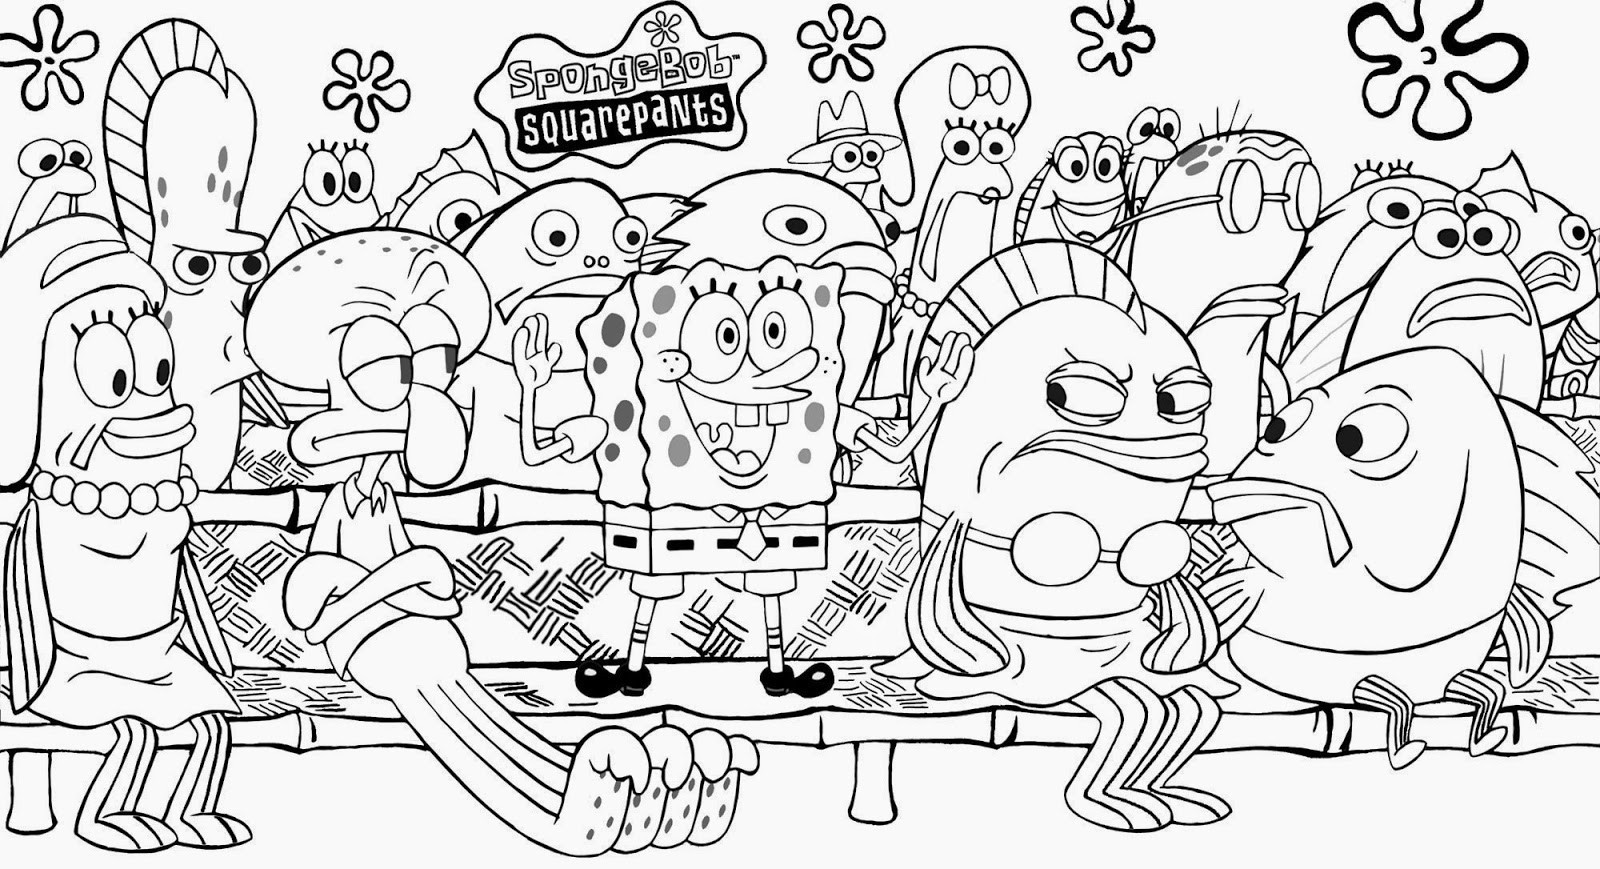 Spongebob Squarepants Colouring In Pages Wallpaper